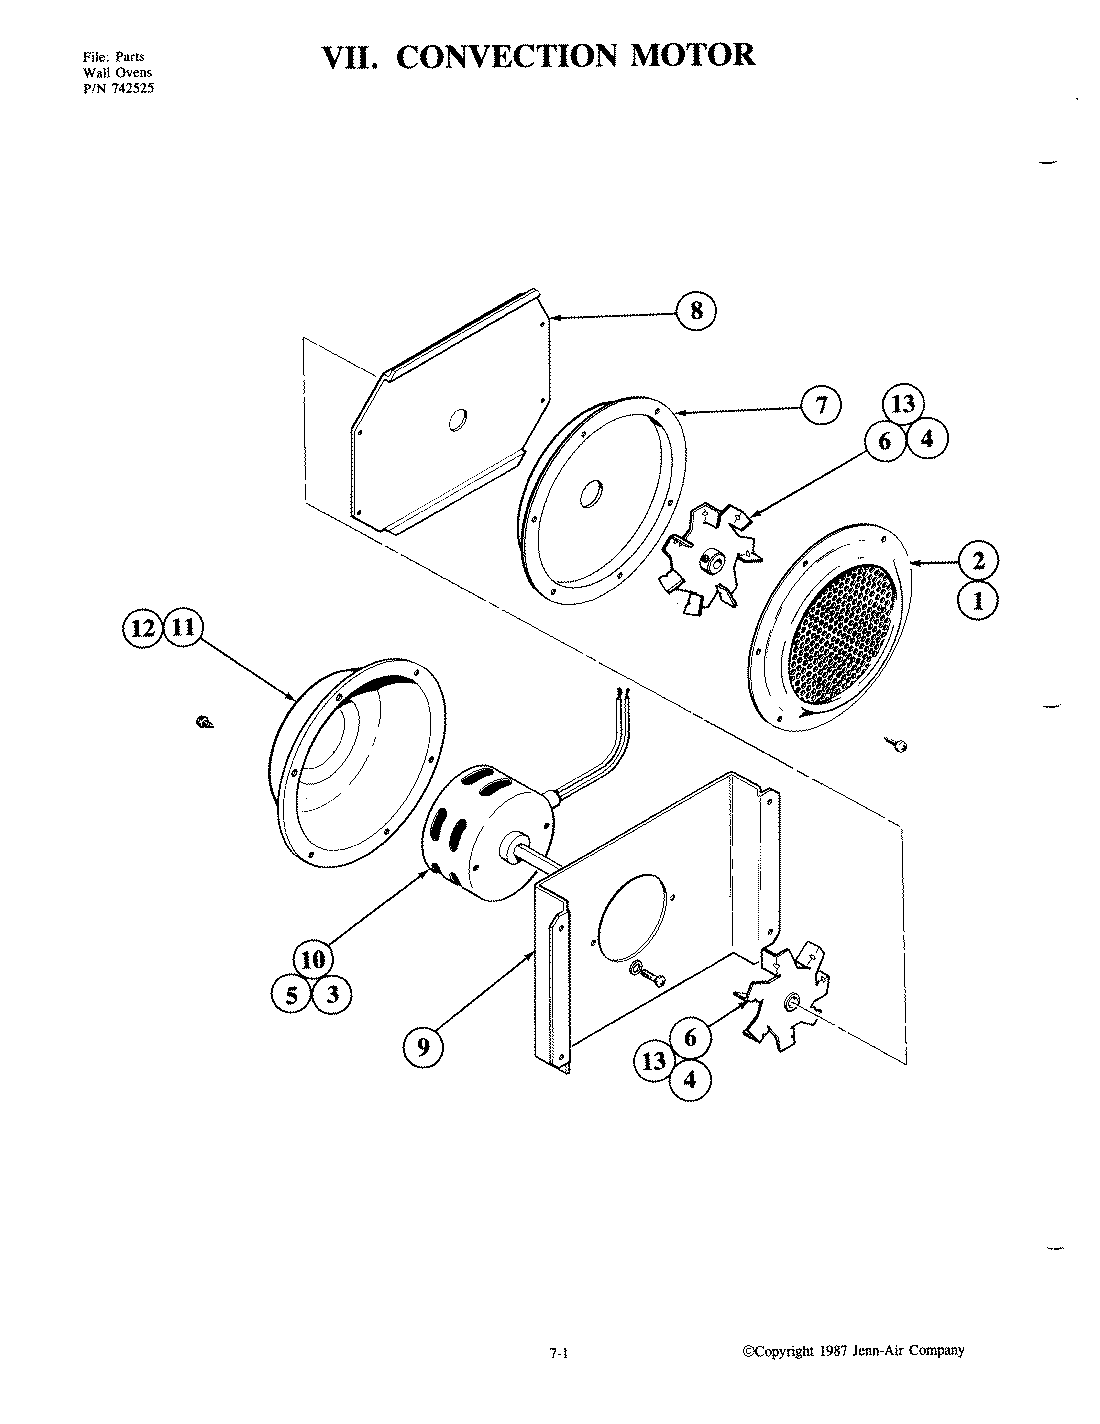 01 - CONVECTION MOTOR